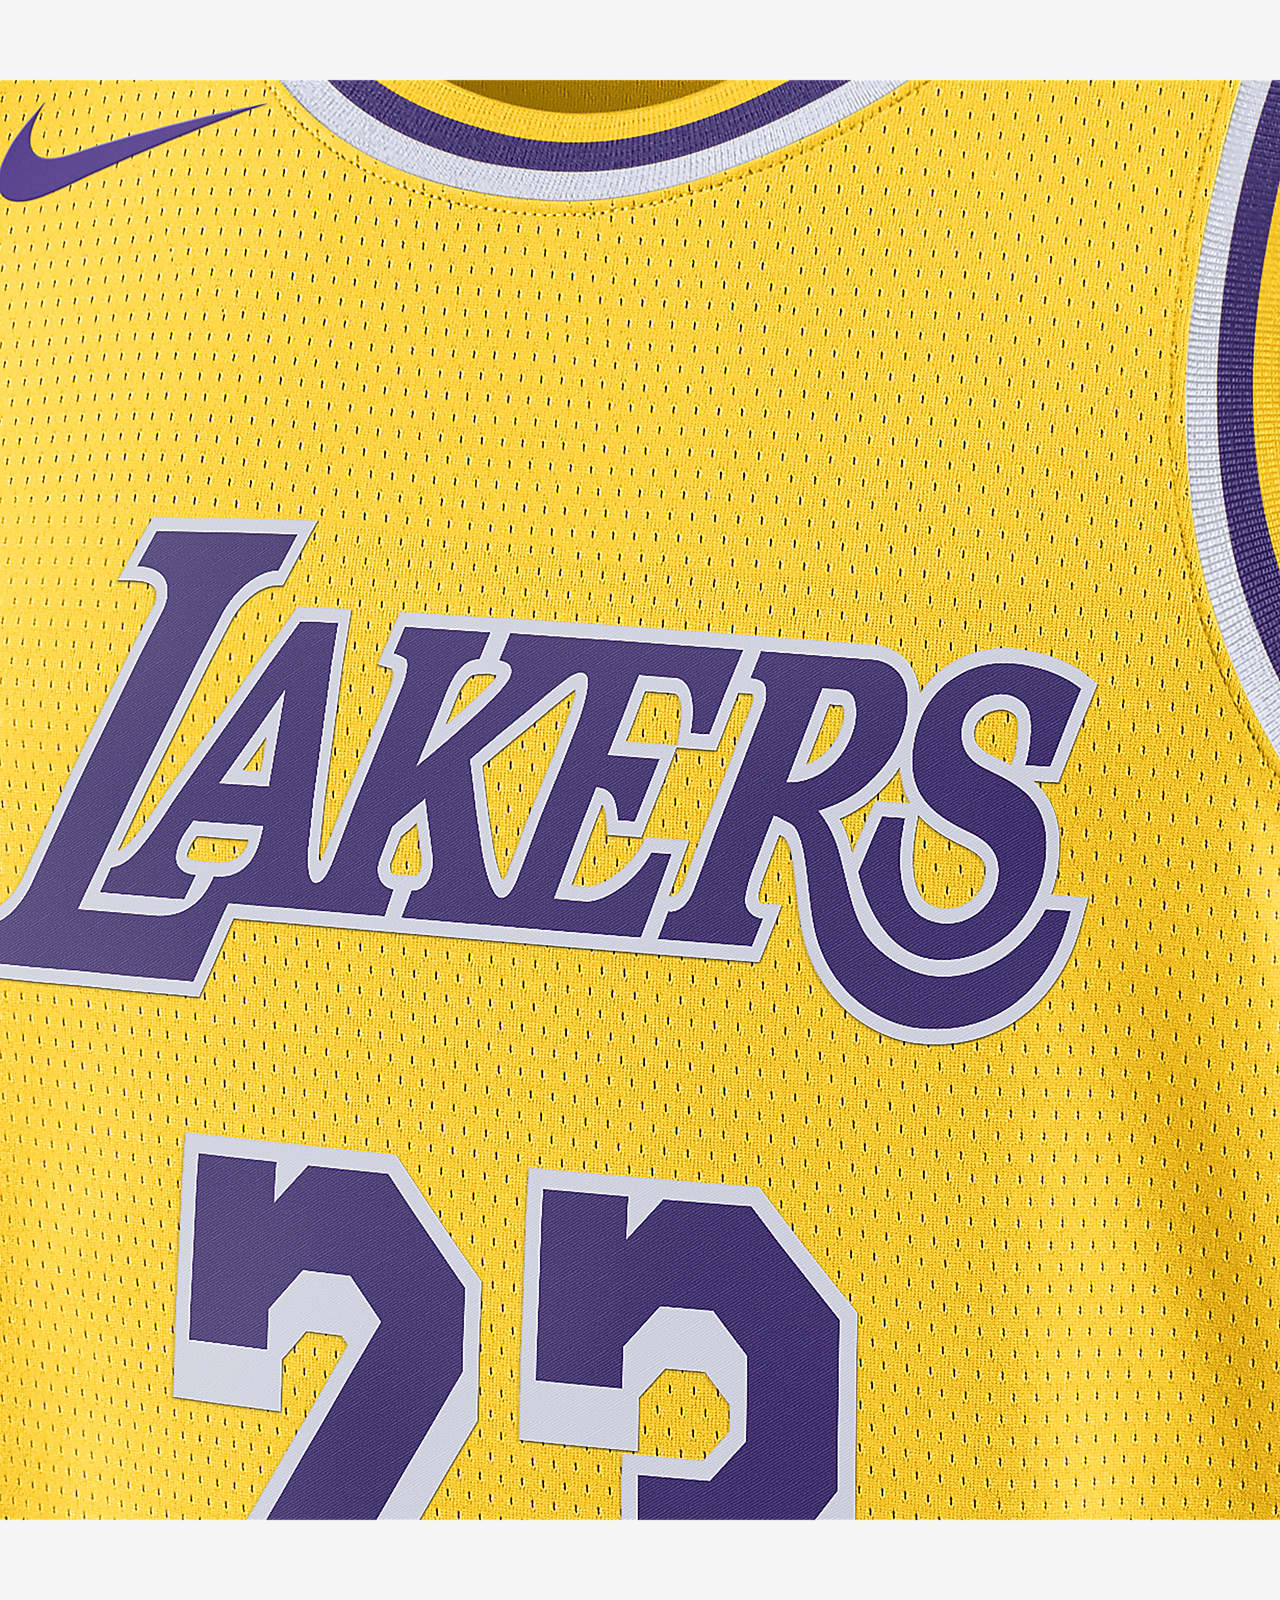 lakers outfit